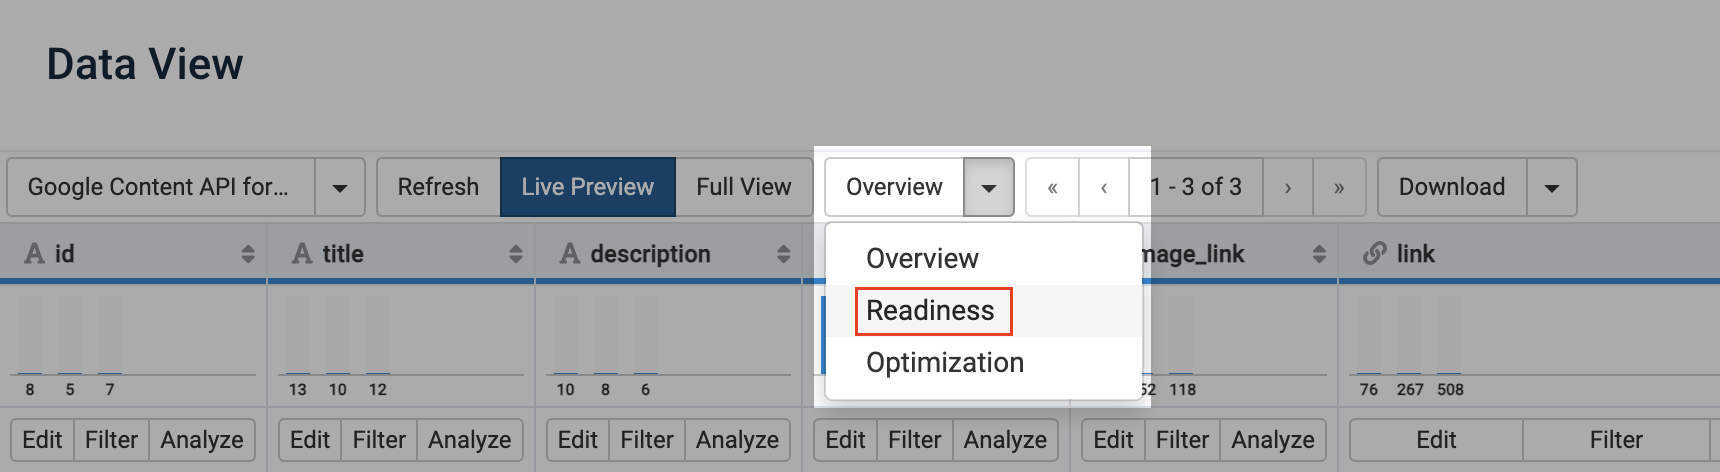 Open the Overview drop-down menu to select Readiness and access the Channel readiness view